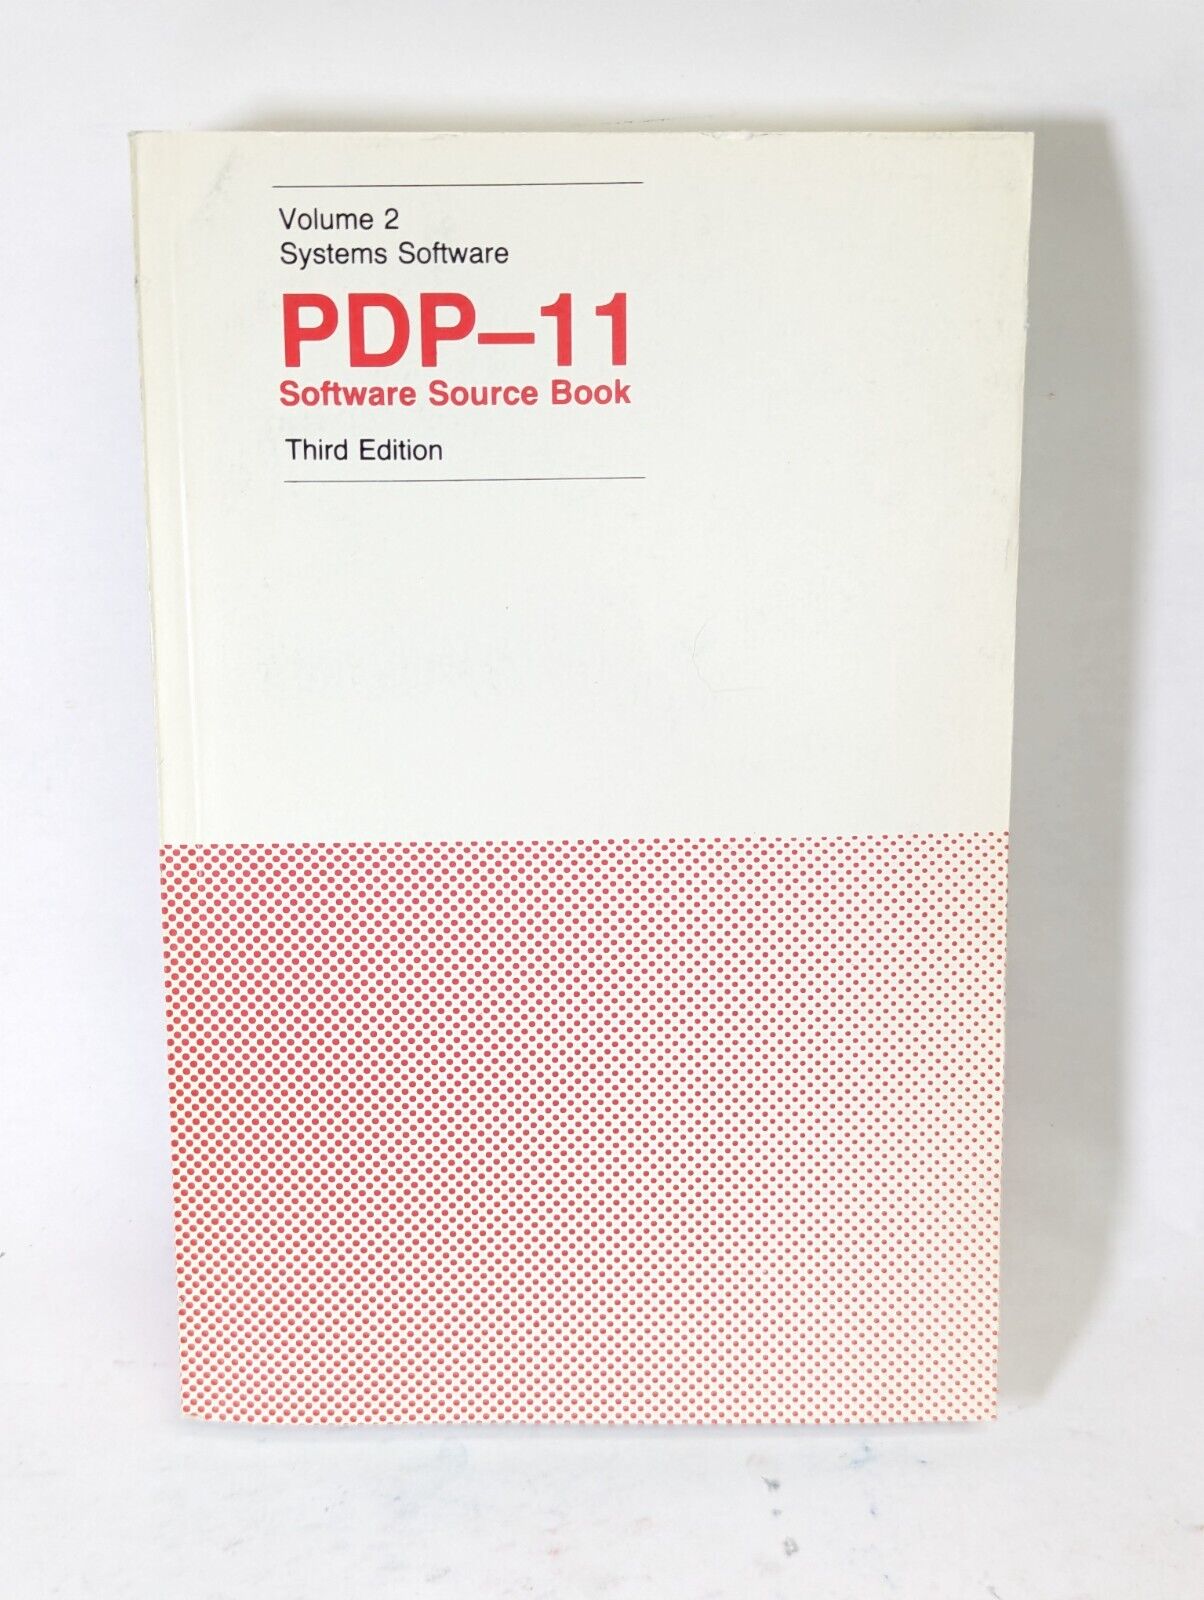 DEC PDP-11 Software Source Book Vol. 2 Systems Software 3rd Edition